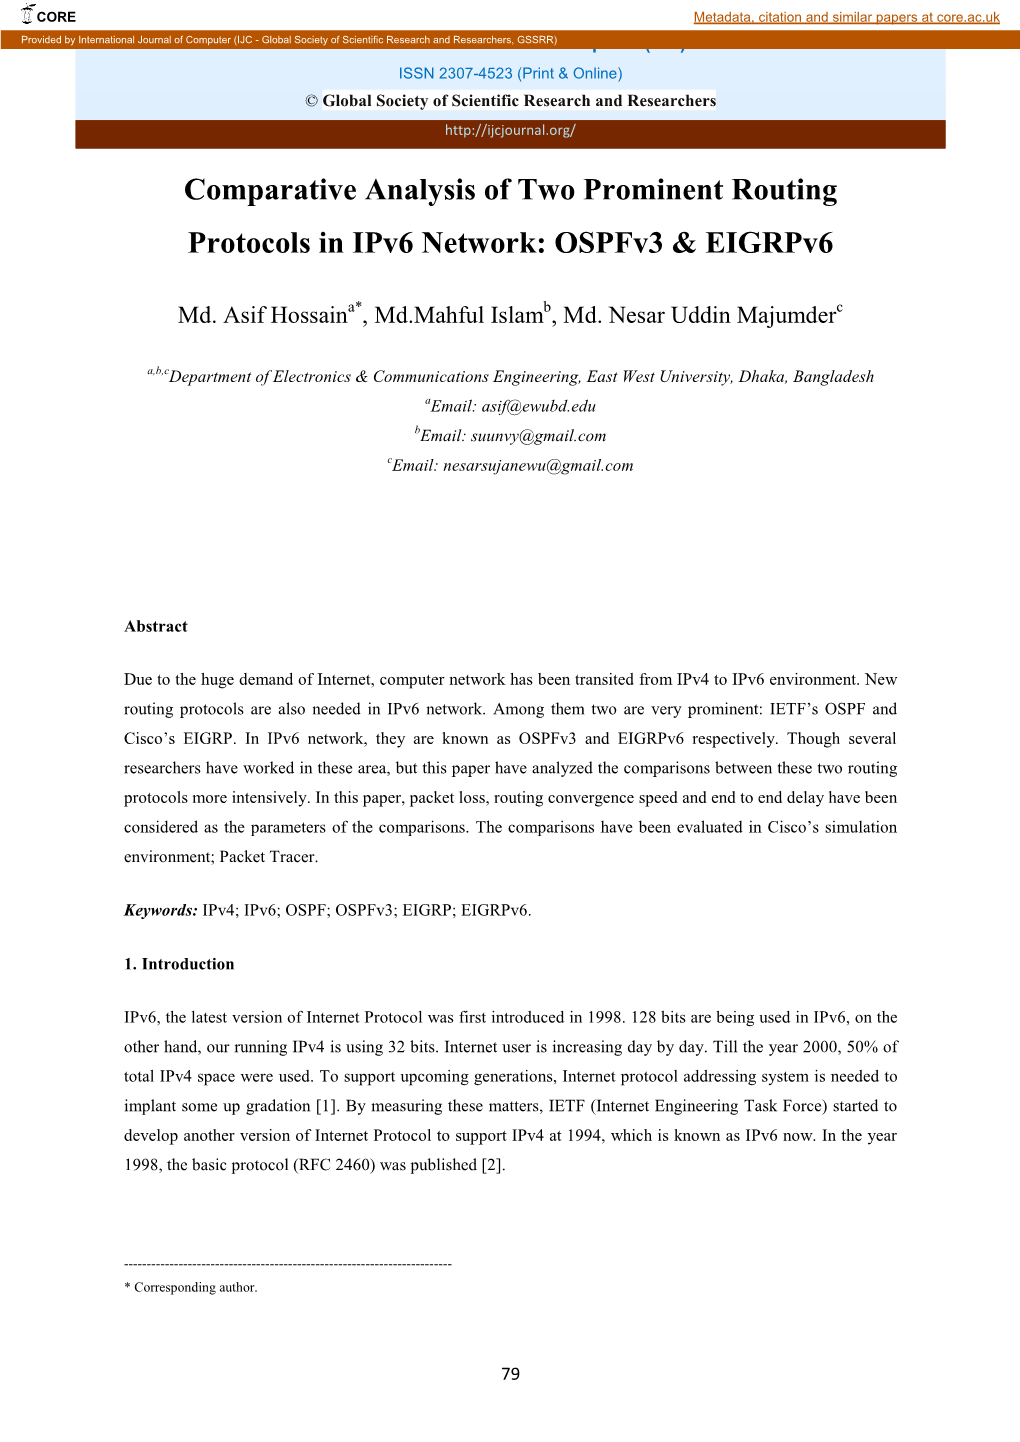 Comparative Analysis of Two Prominent Routing Protocols in Ipv6 Network: Ospfv3 & Eigrpv6